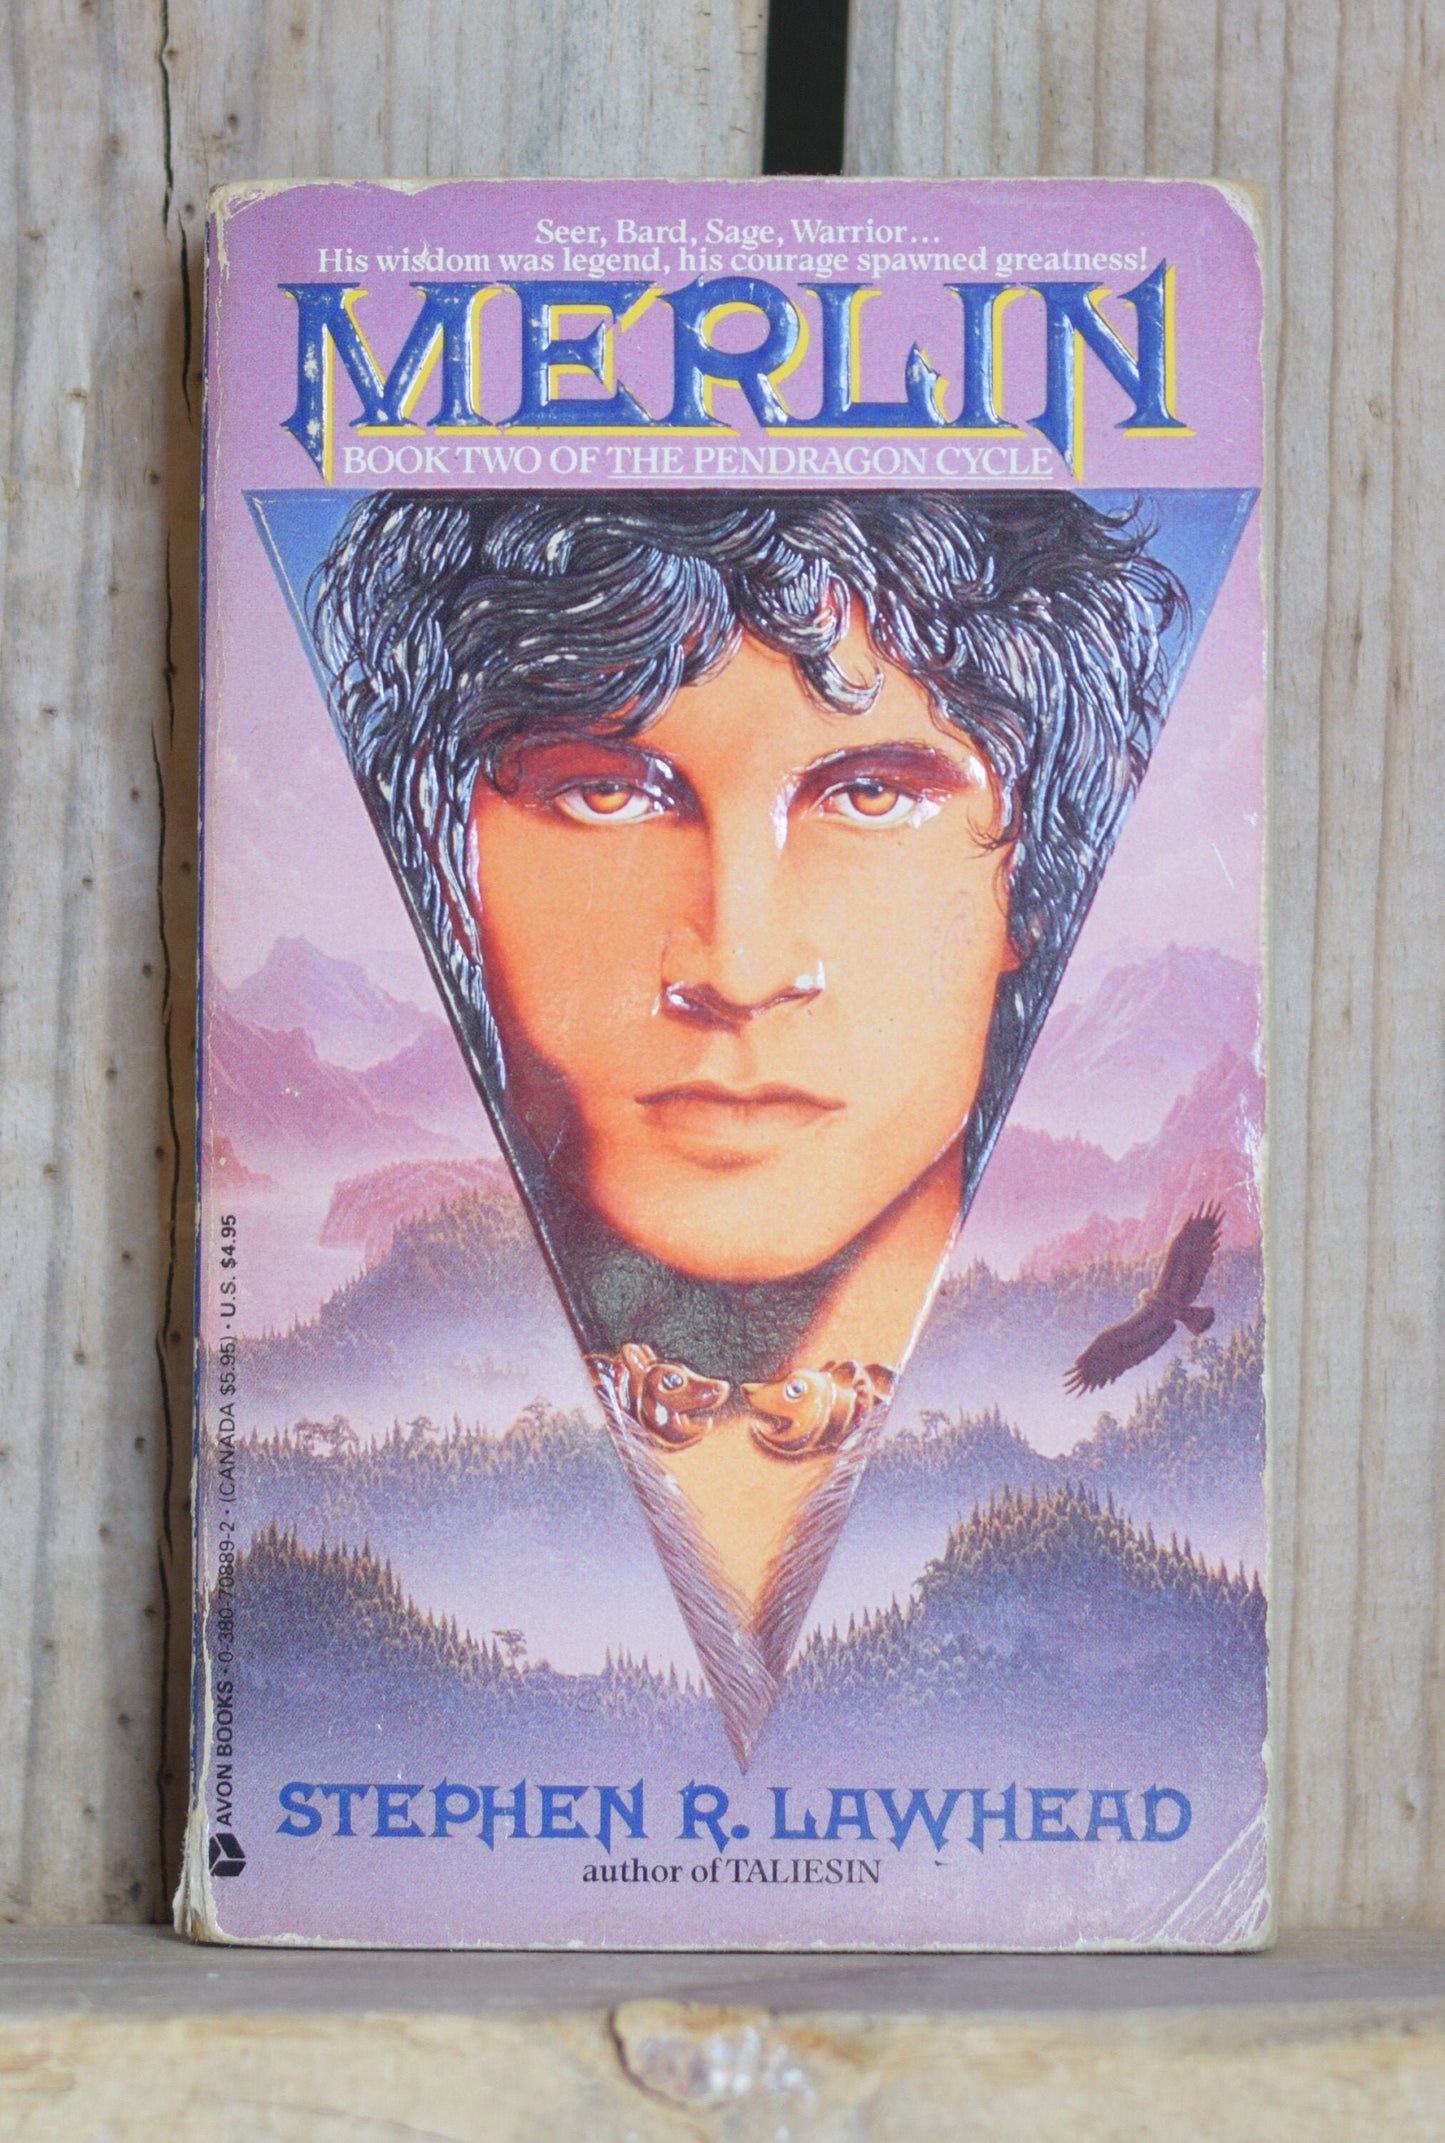 Vintage Fantasy Paperback Novel: Stephen R Lawhead - Merlin, Book two of The Pendragon Cycle